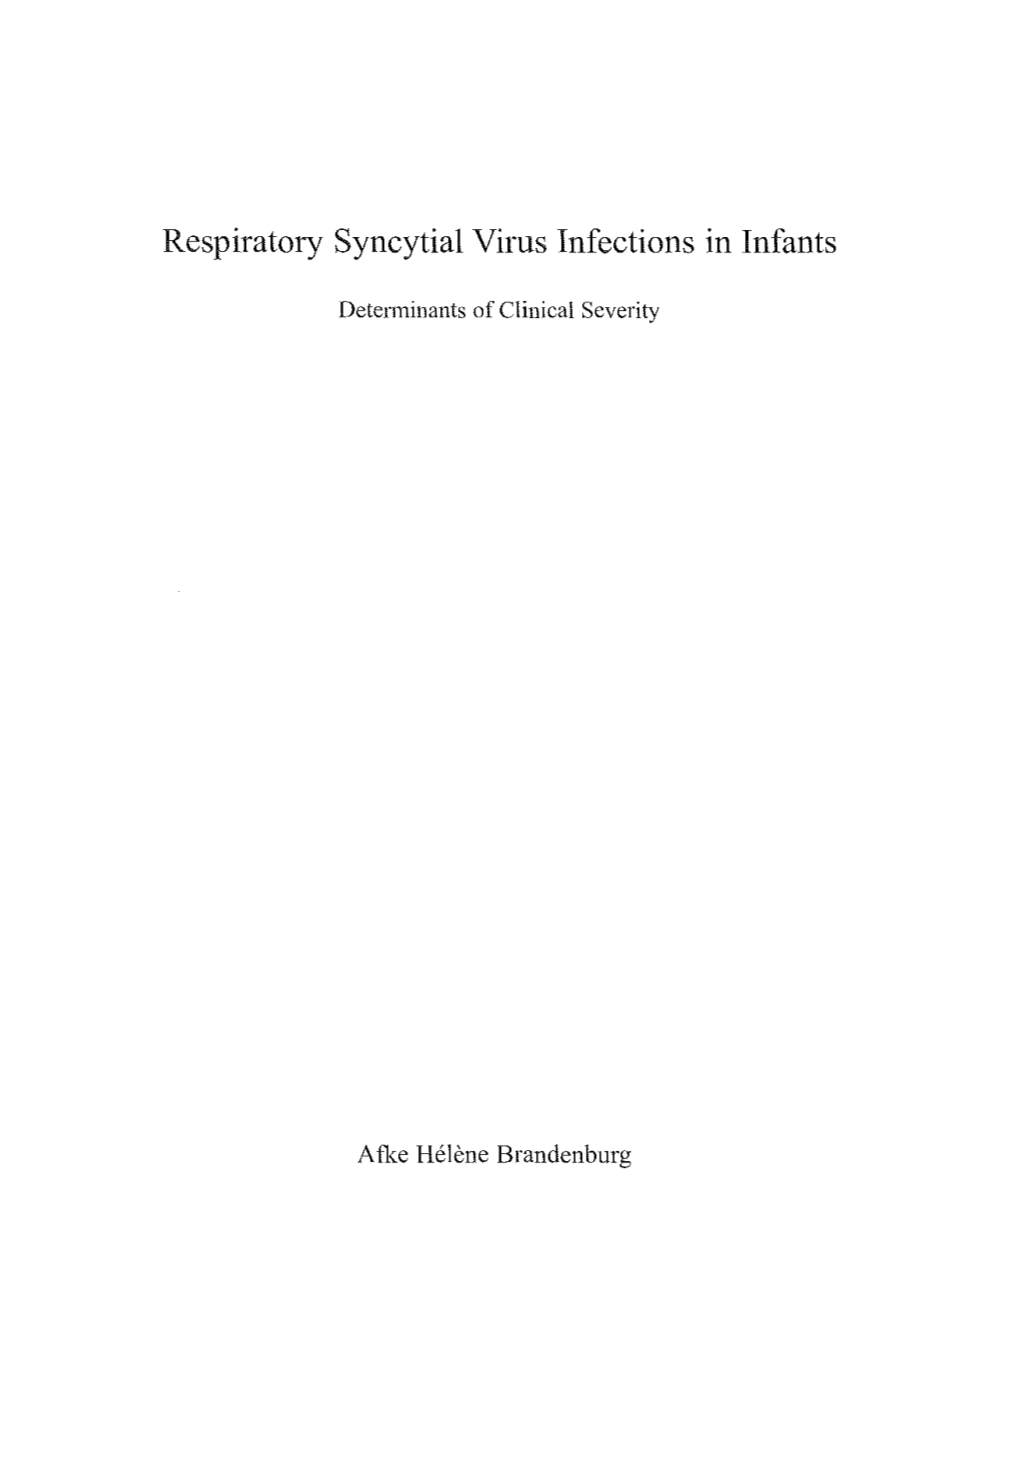 Respiratory Syncytial Virus Infections in Infants